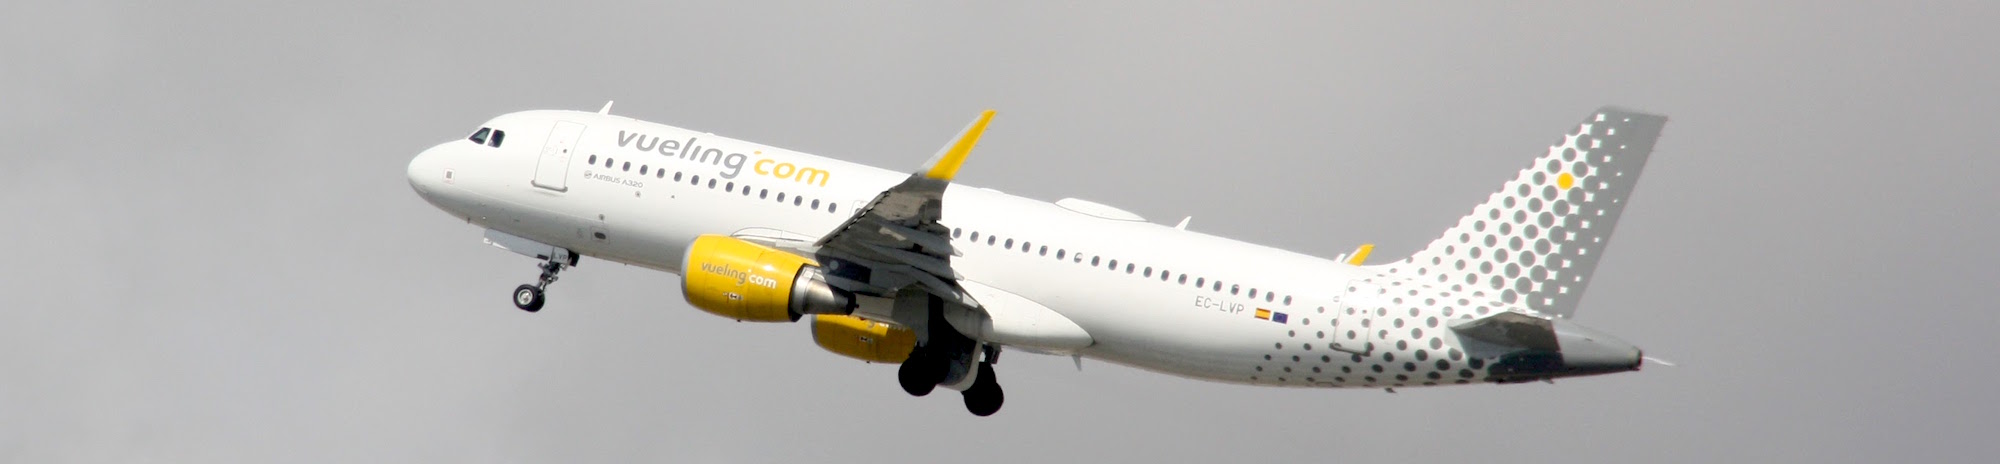 Best time to book flights for Barcelona (BCN) to London (LGW) flights with Vueling at AirHint